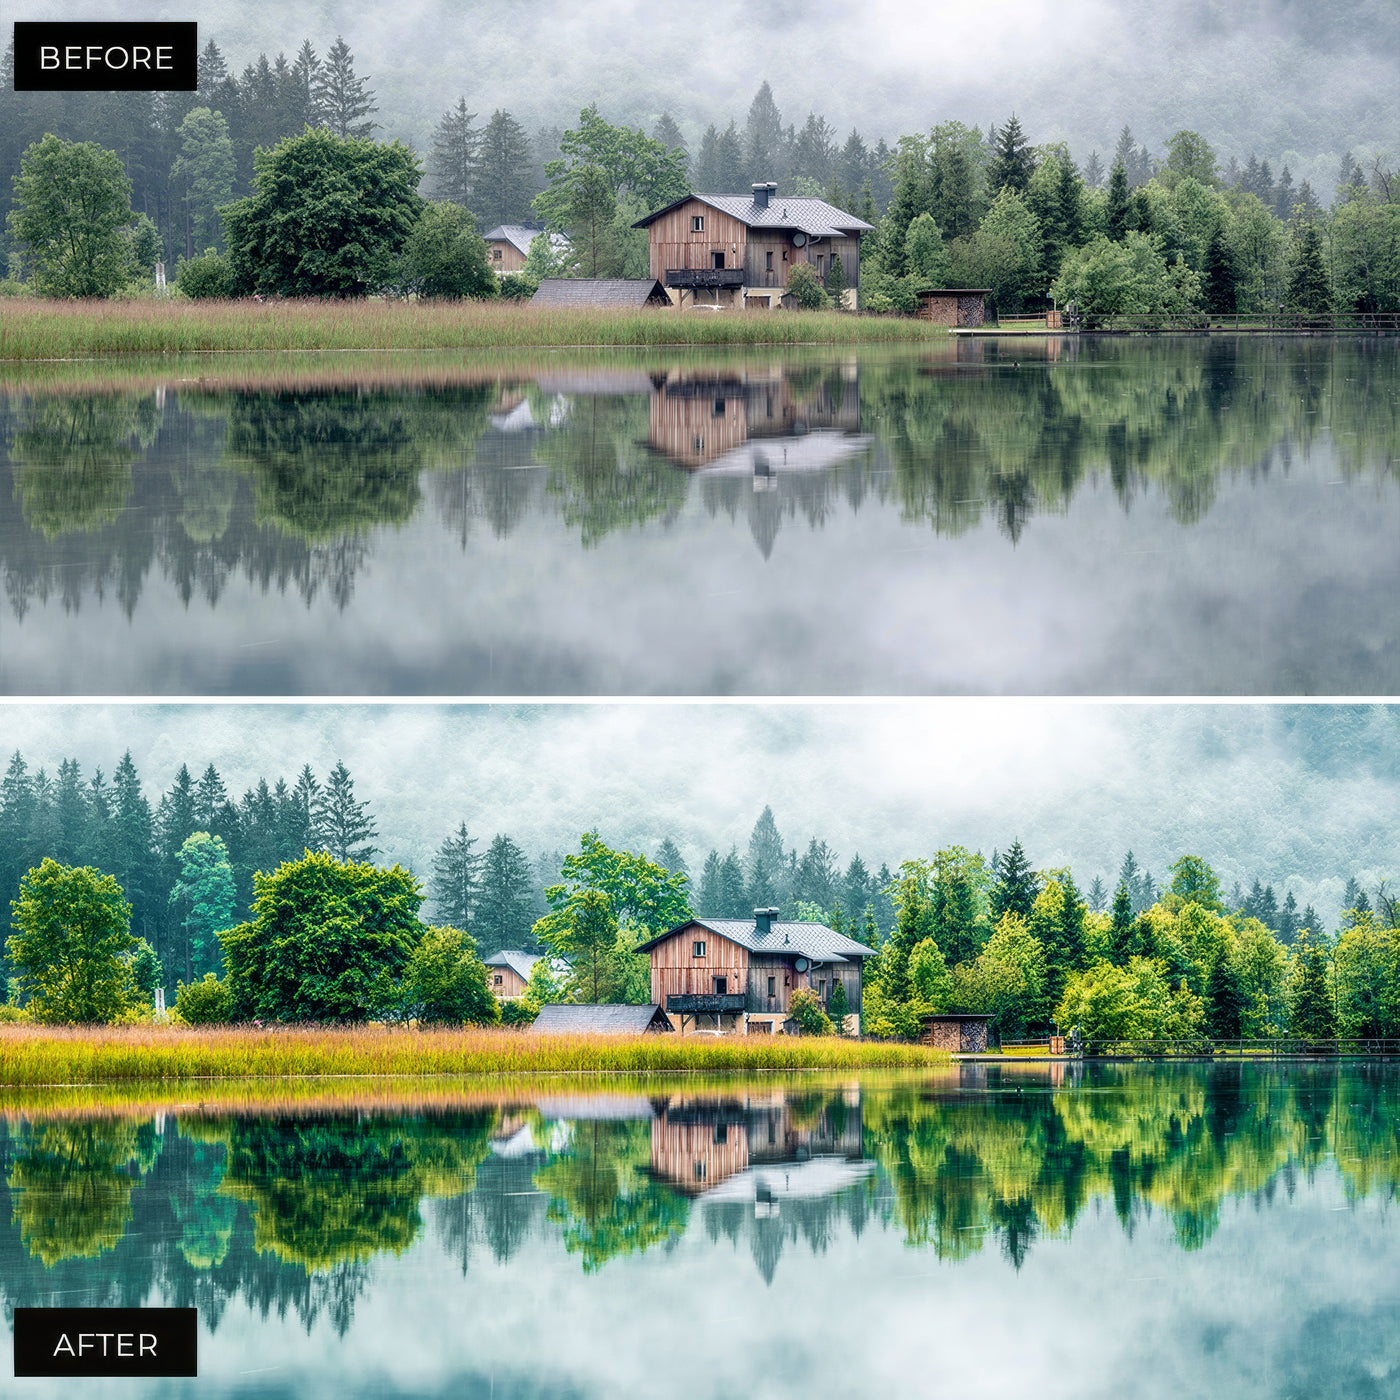 landscape photography presets outdoor presets for lightroom lightroom presets for landscape photography lightroom presets for nature free landscape lightroom presets photoshop landscape presets